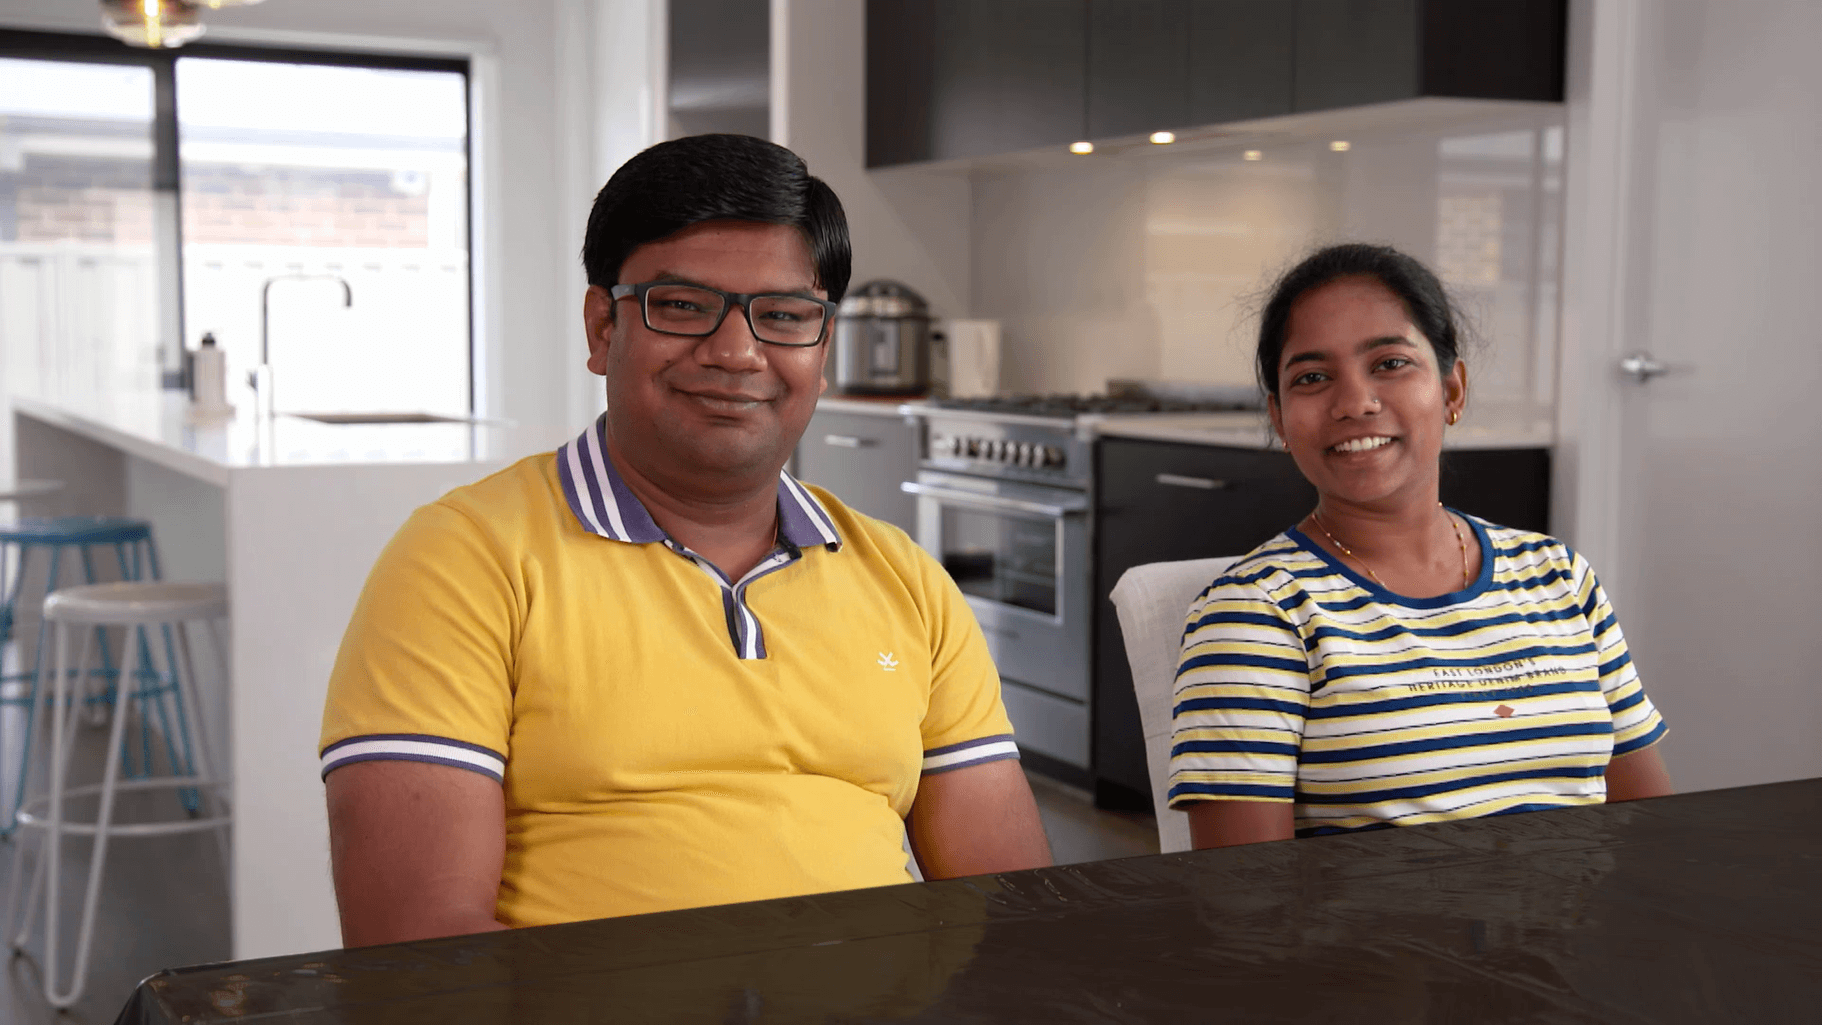 Home builders in Melbourne, Sidd & Shraddha tell why they built with Arden Homes